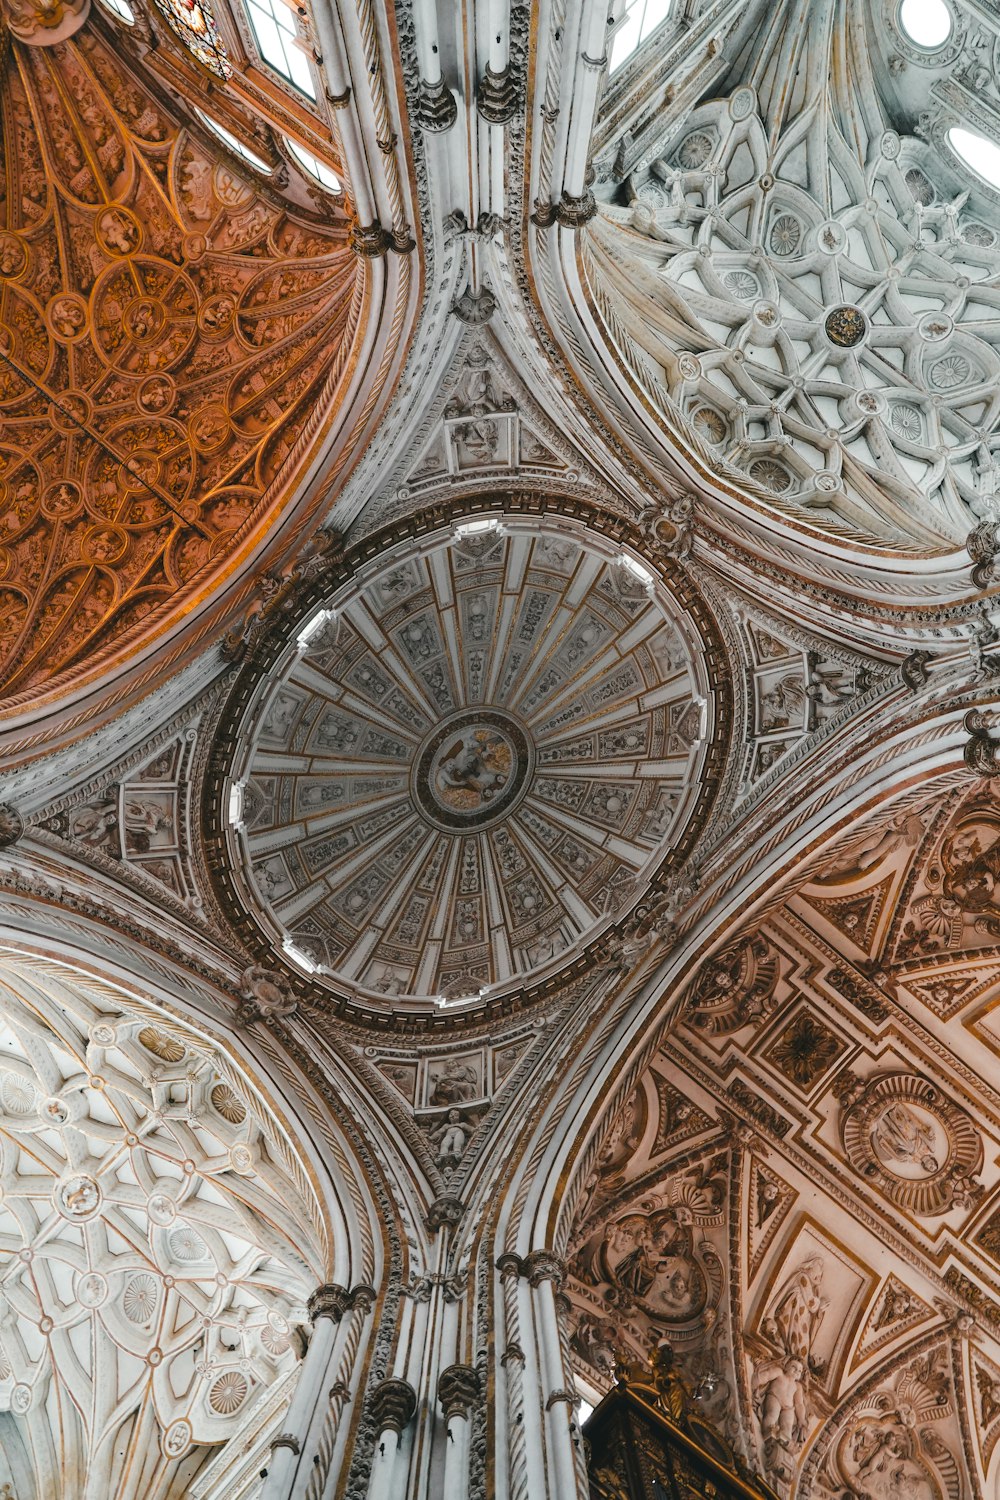 the ceiling of a cathedral with intricate designs